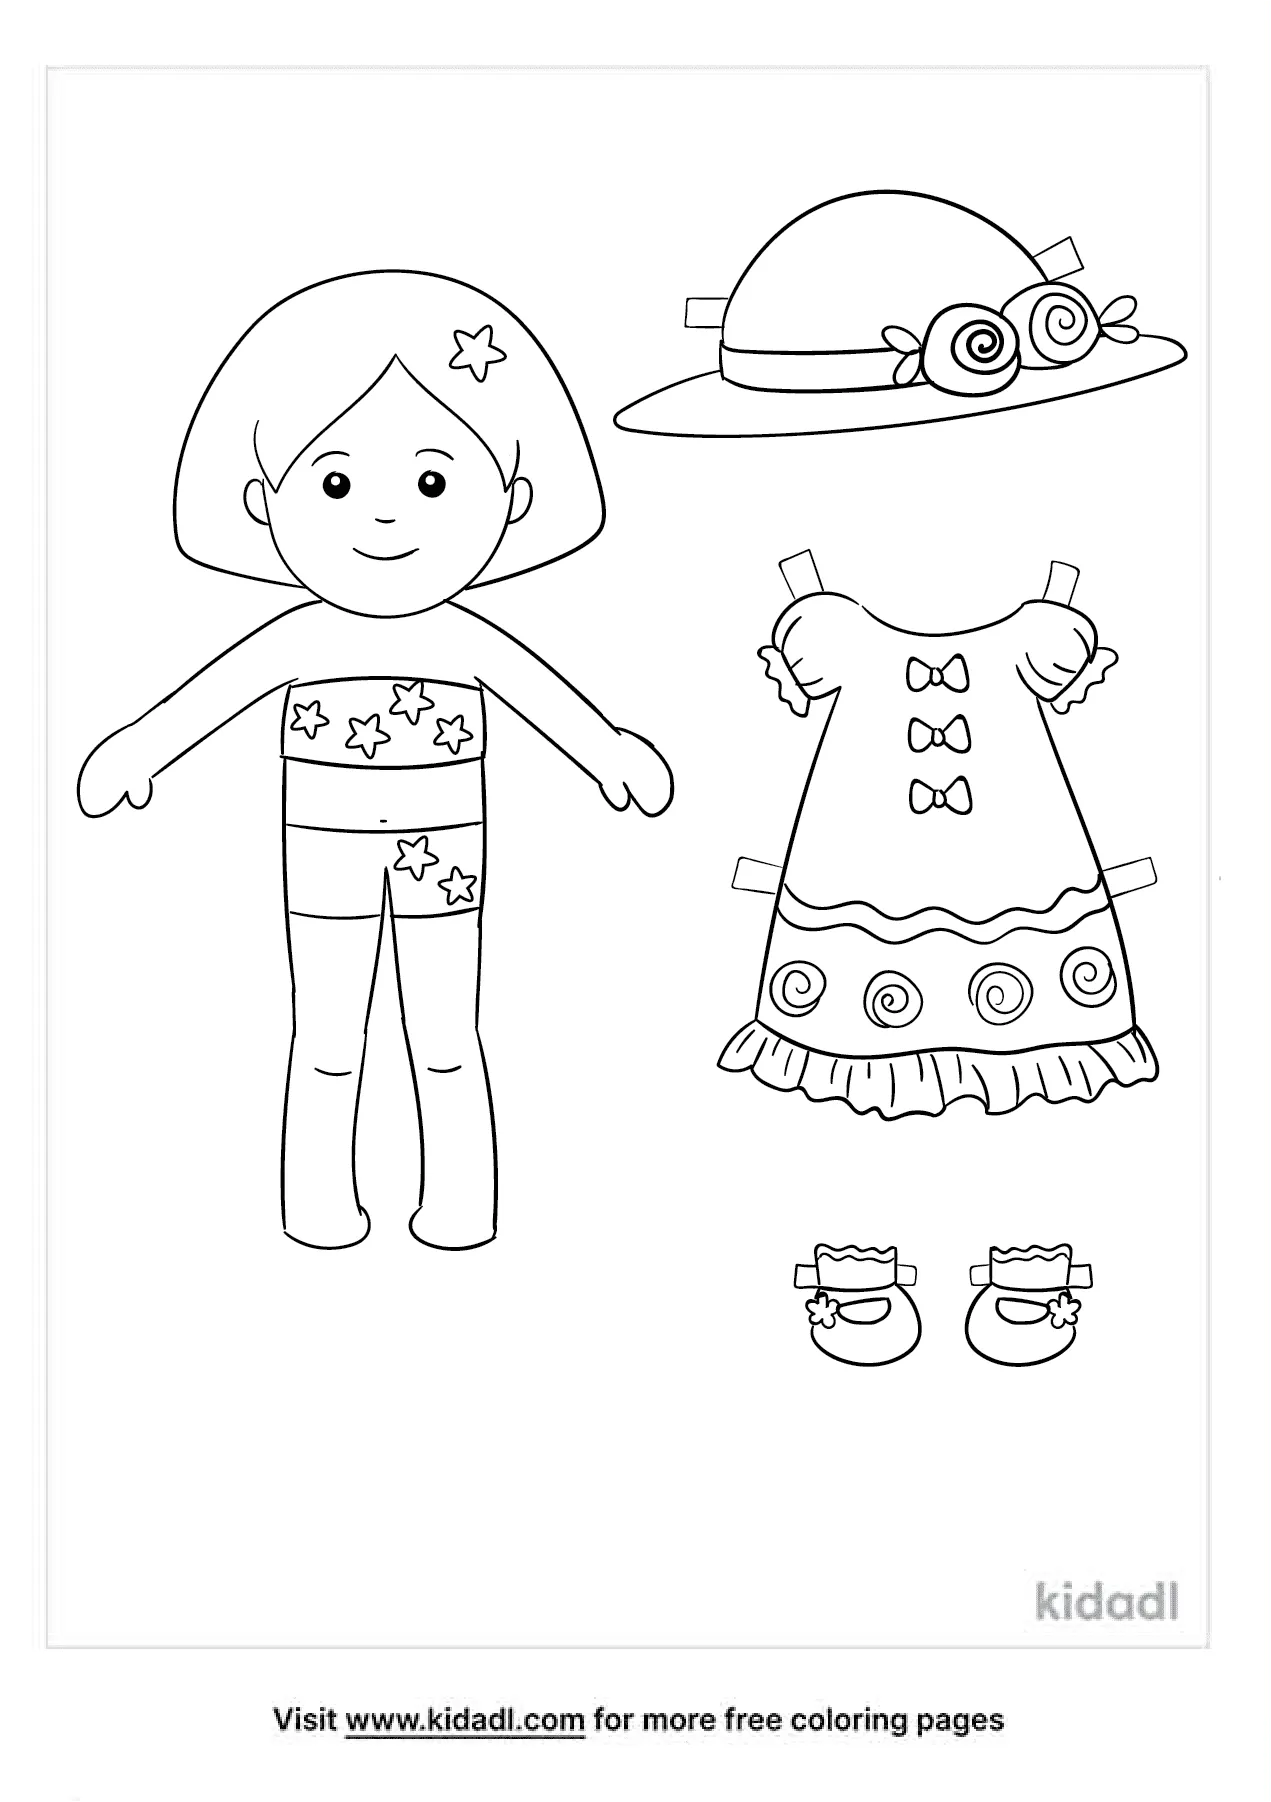 Paper Doll Coloring Page